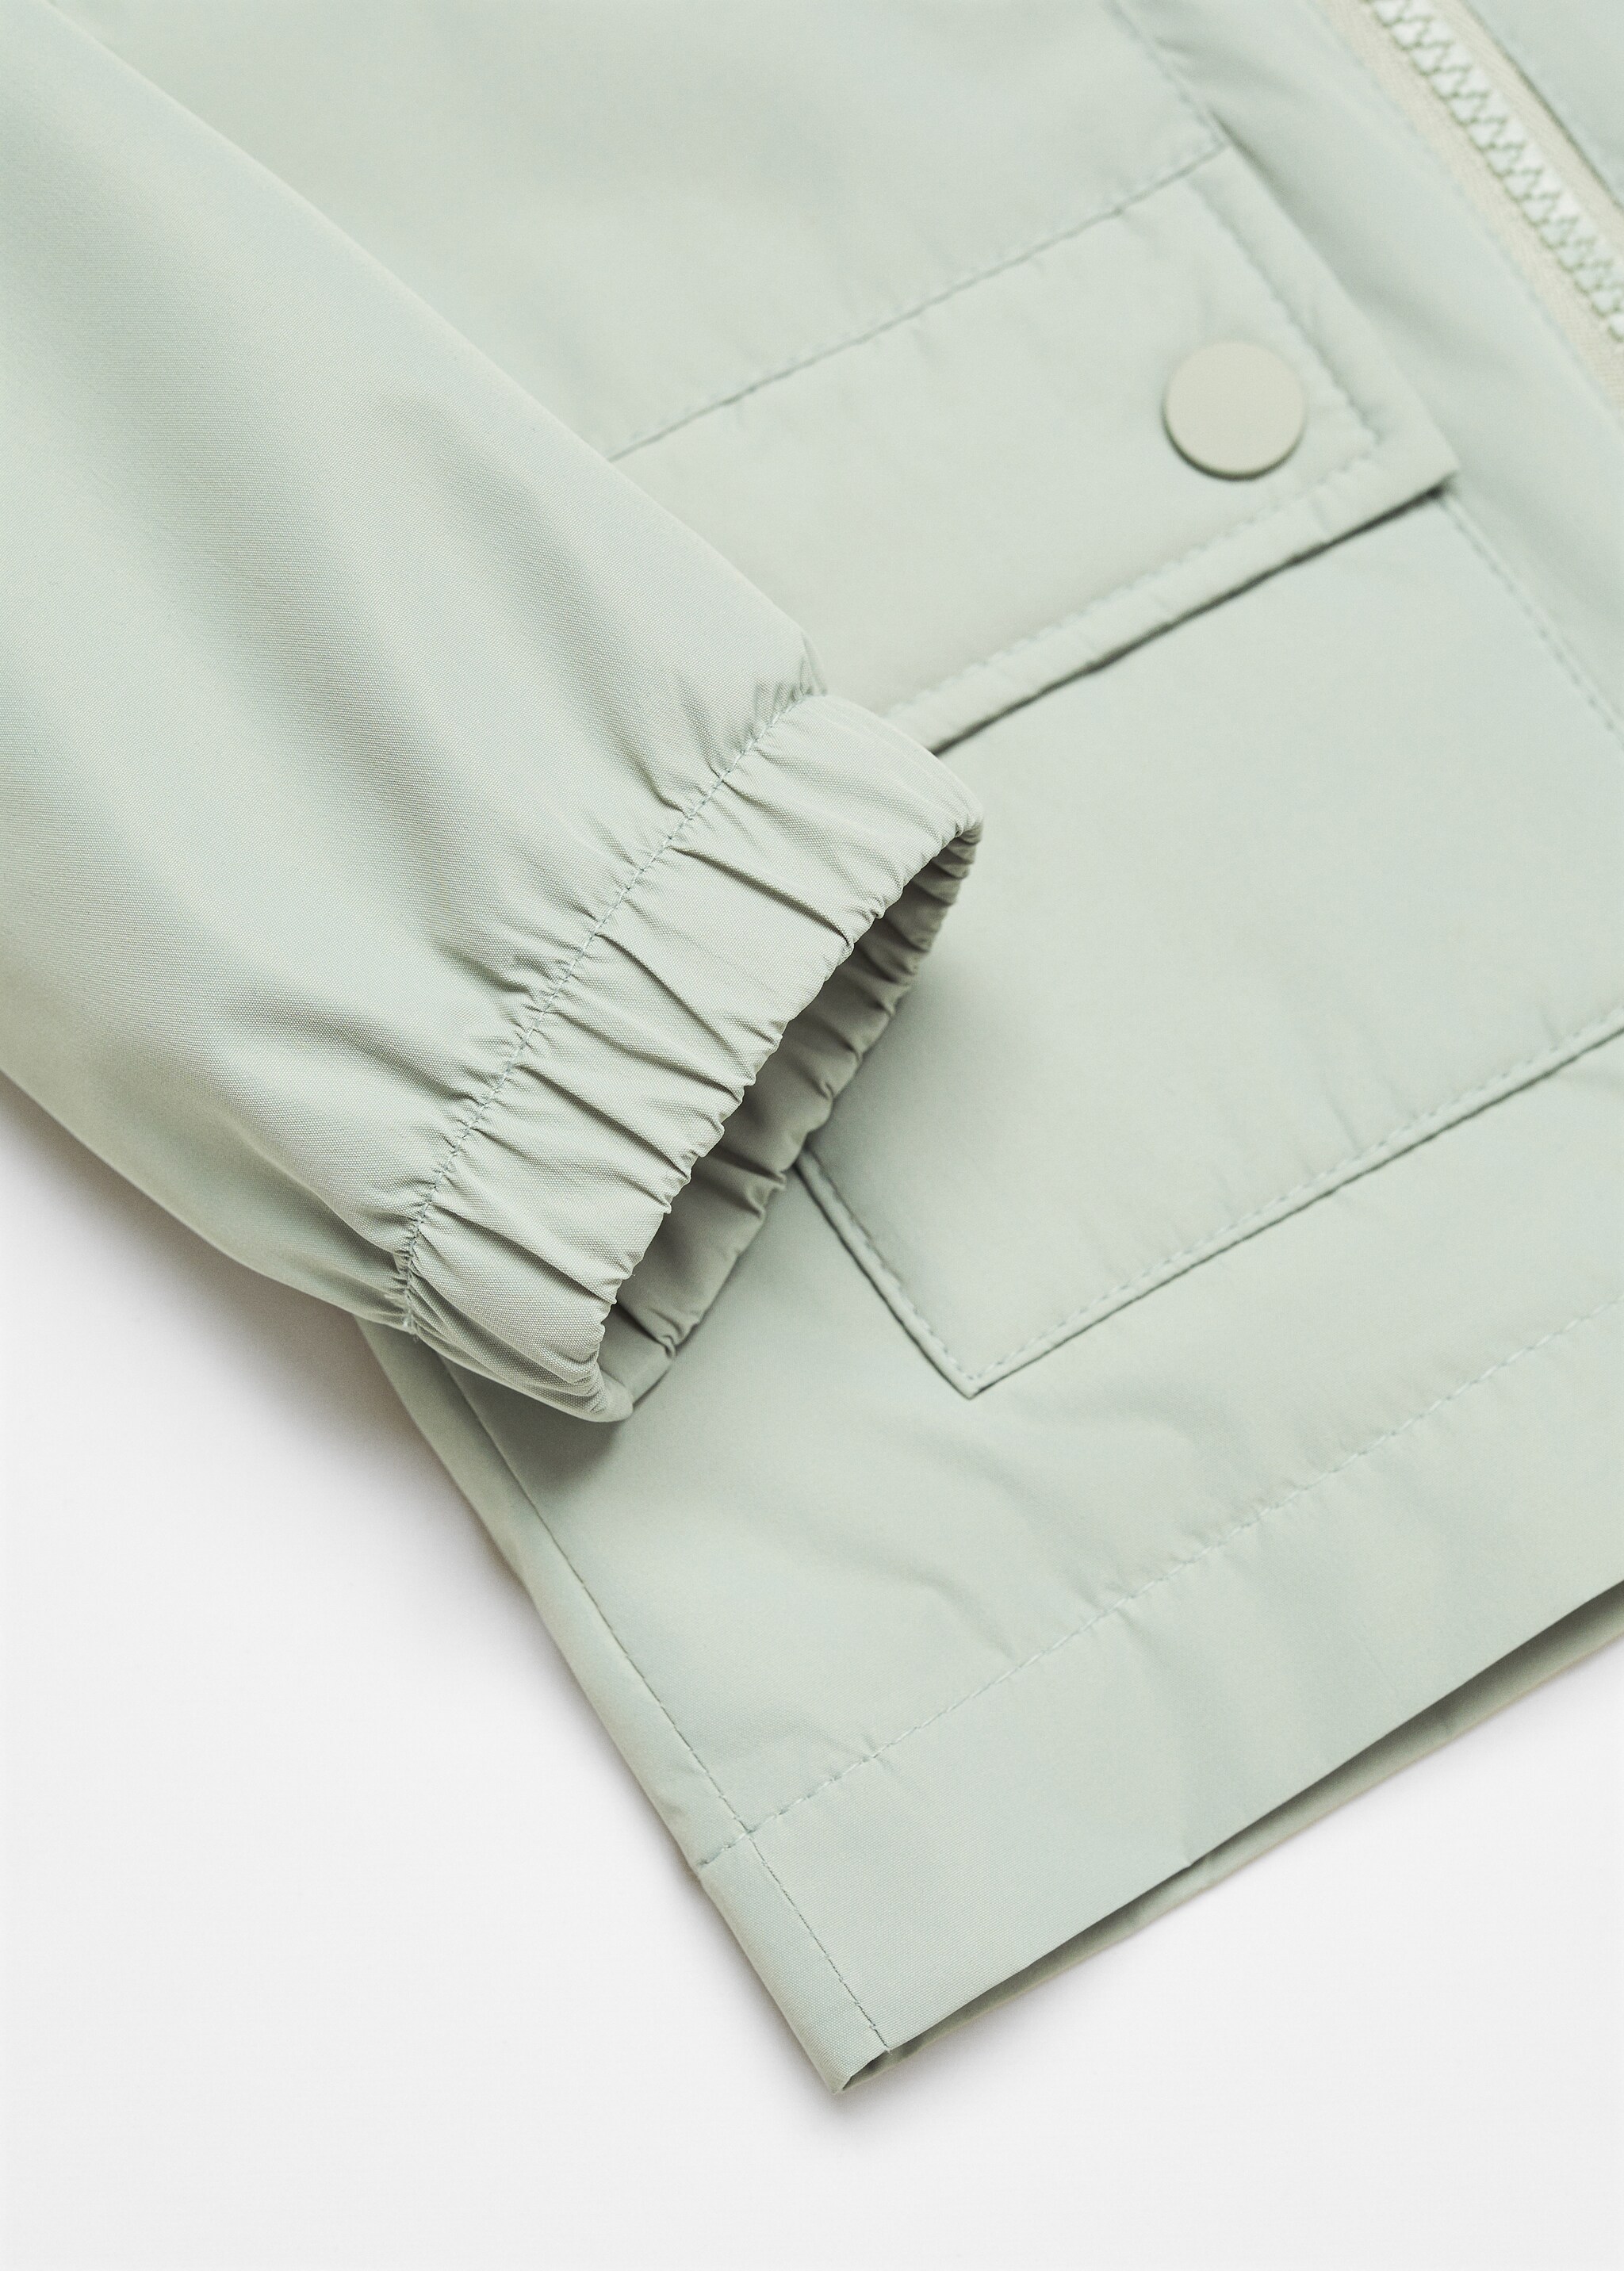 Raincoat hooded jacket - Details of the article 0